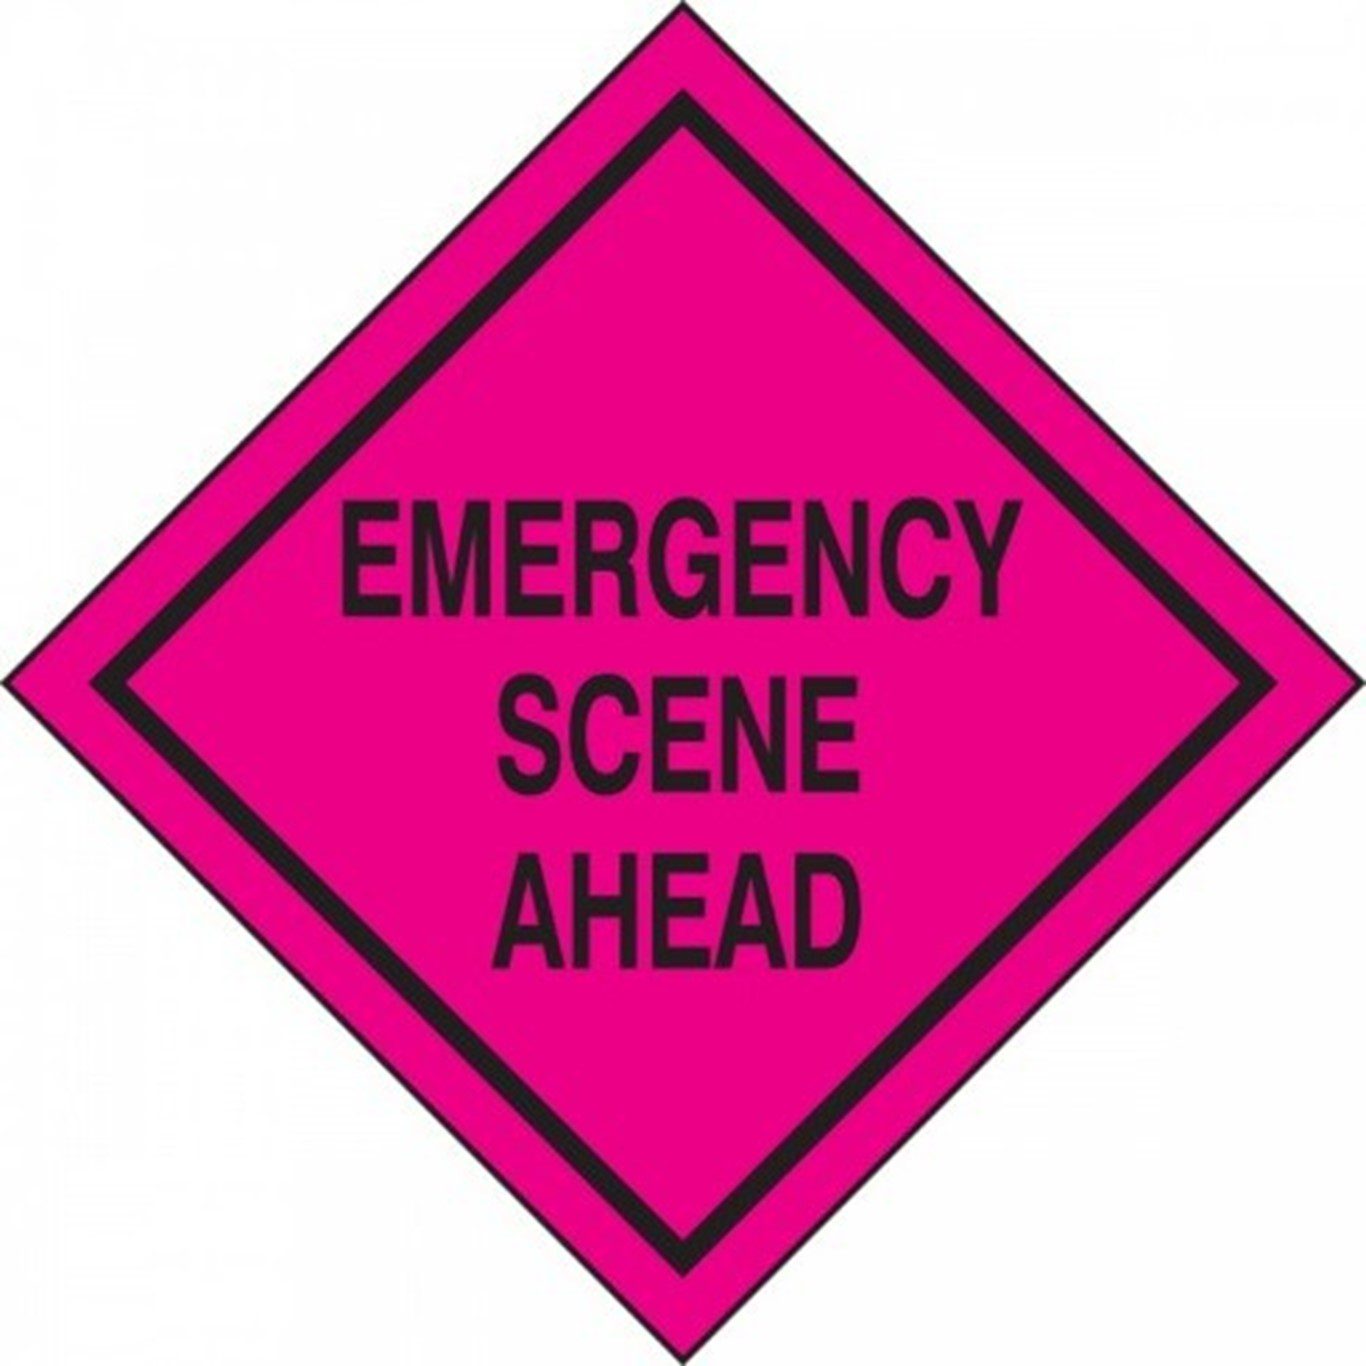 An example of a bright pink incident warning sign. The bright pink sign says the words "emergency scene ahead." It is a diamond shape, with a thick black line slightly inset from the borders of the sign's shape.